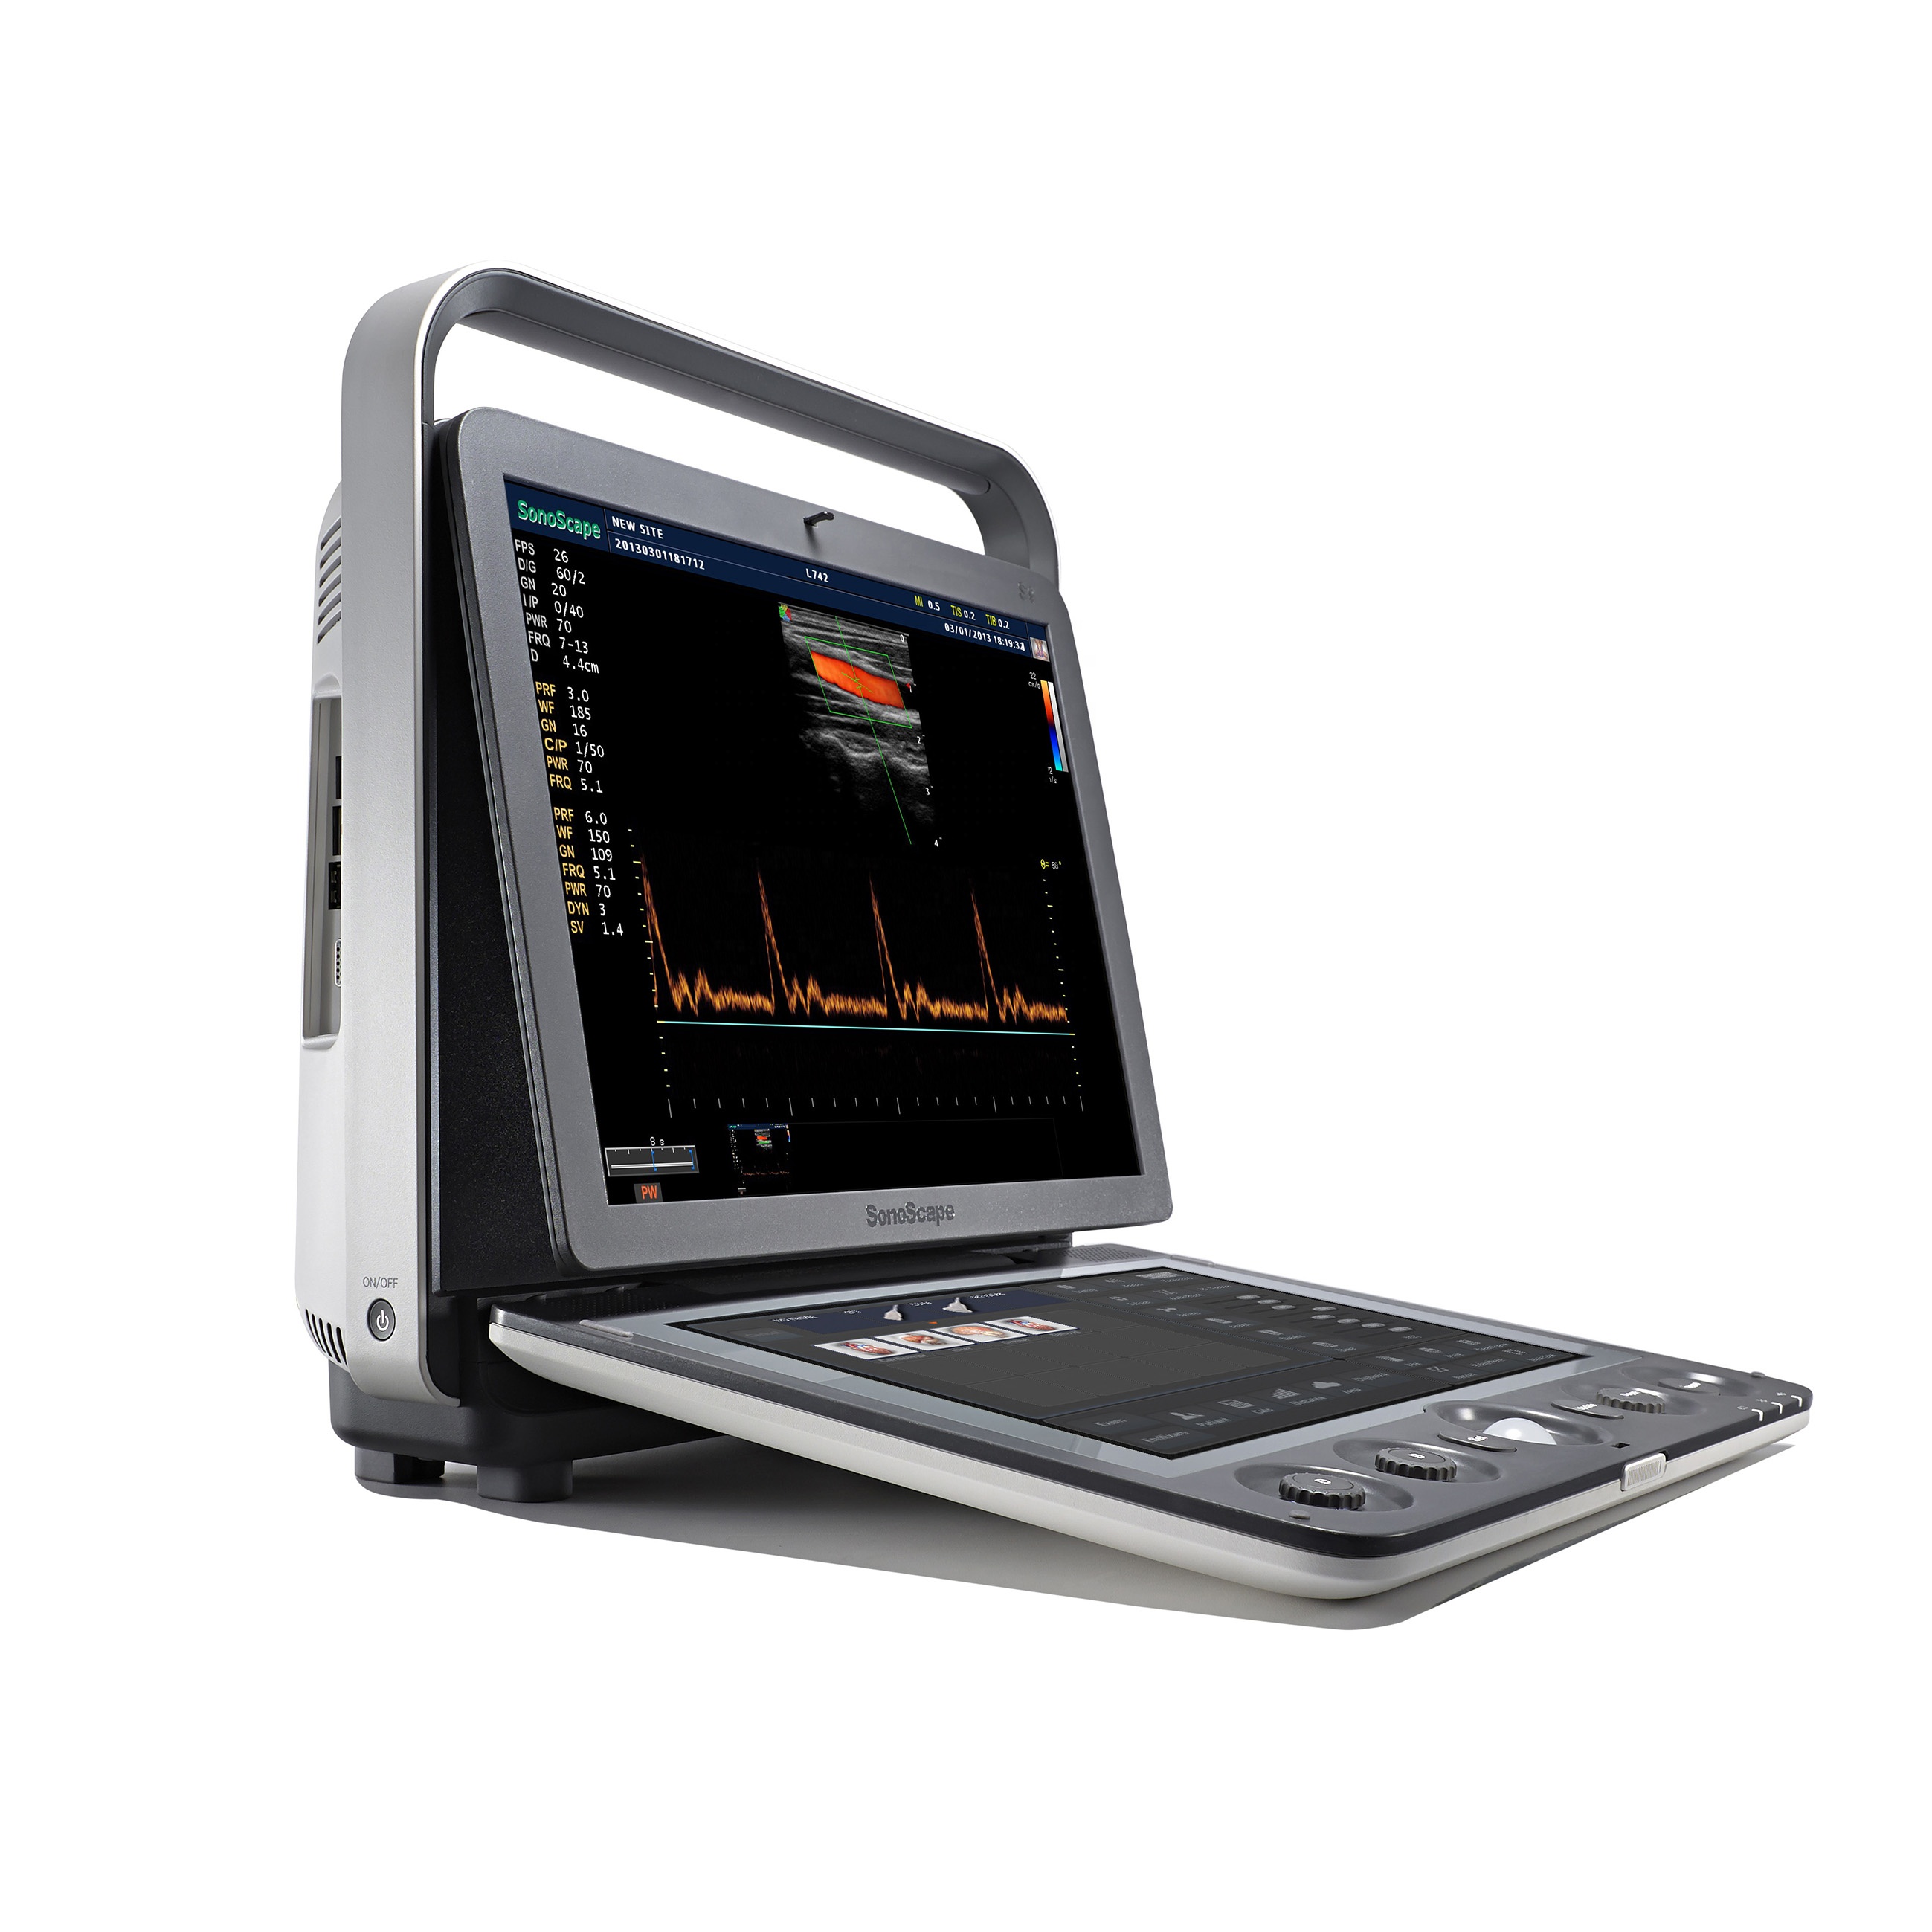 SonoScape S9 Affordable Veterinary Full Digital Portable Ultrasound Scanner With CE Certification